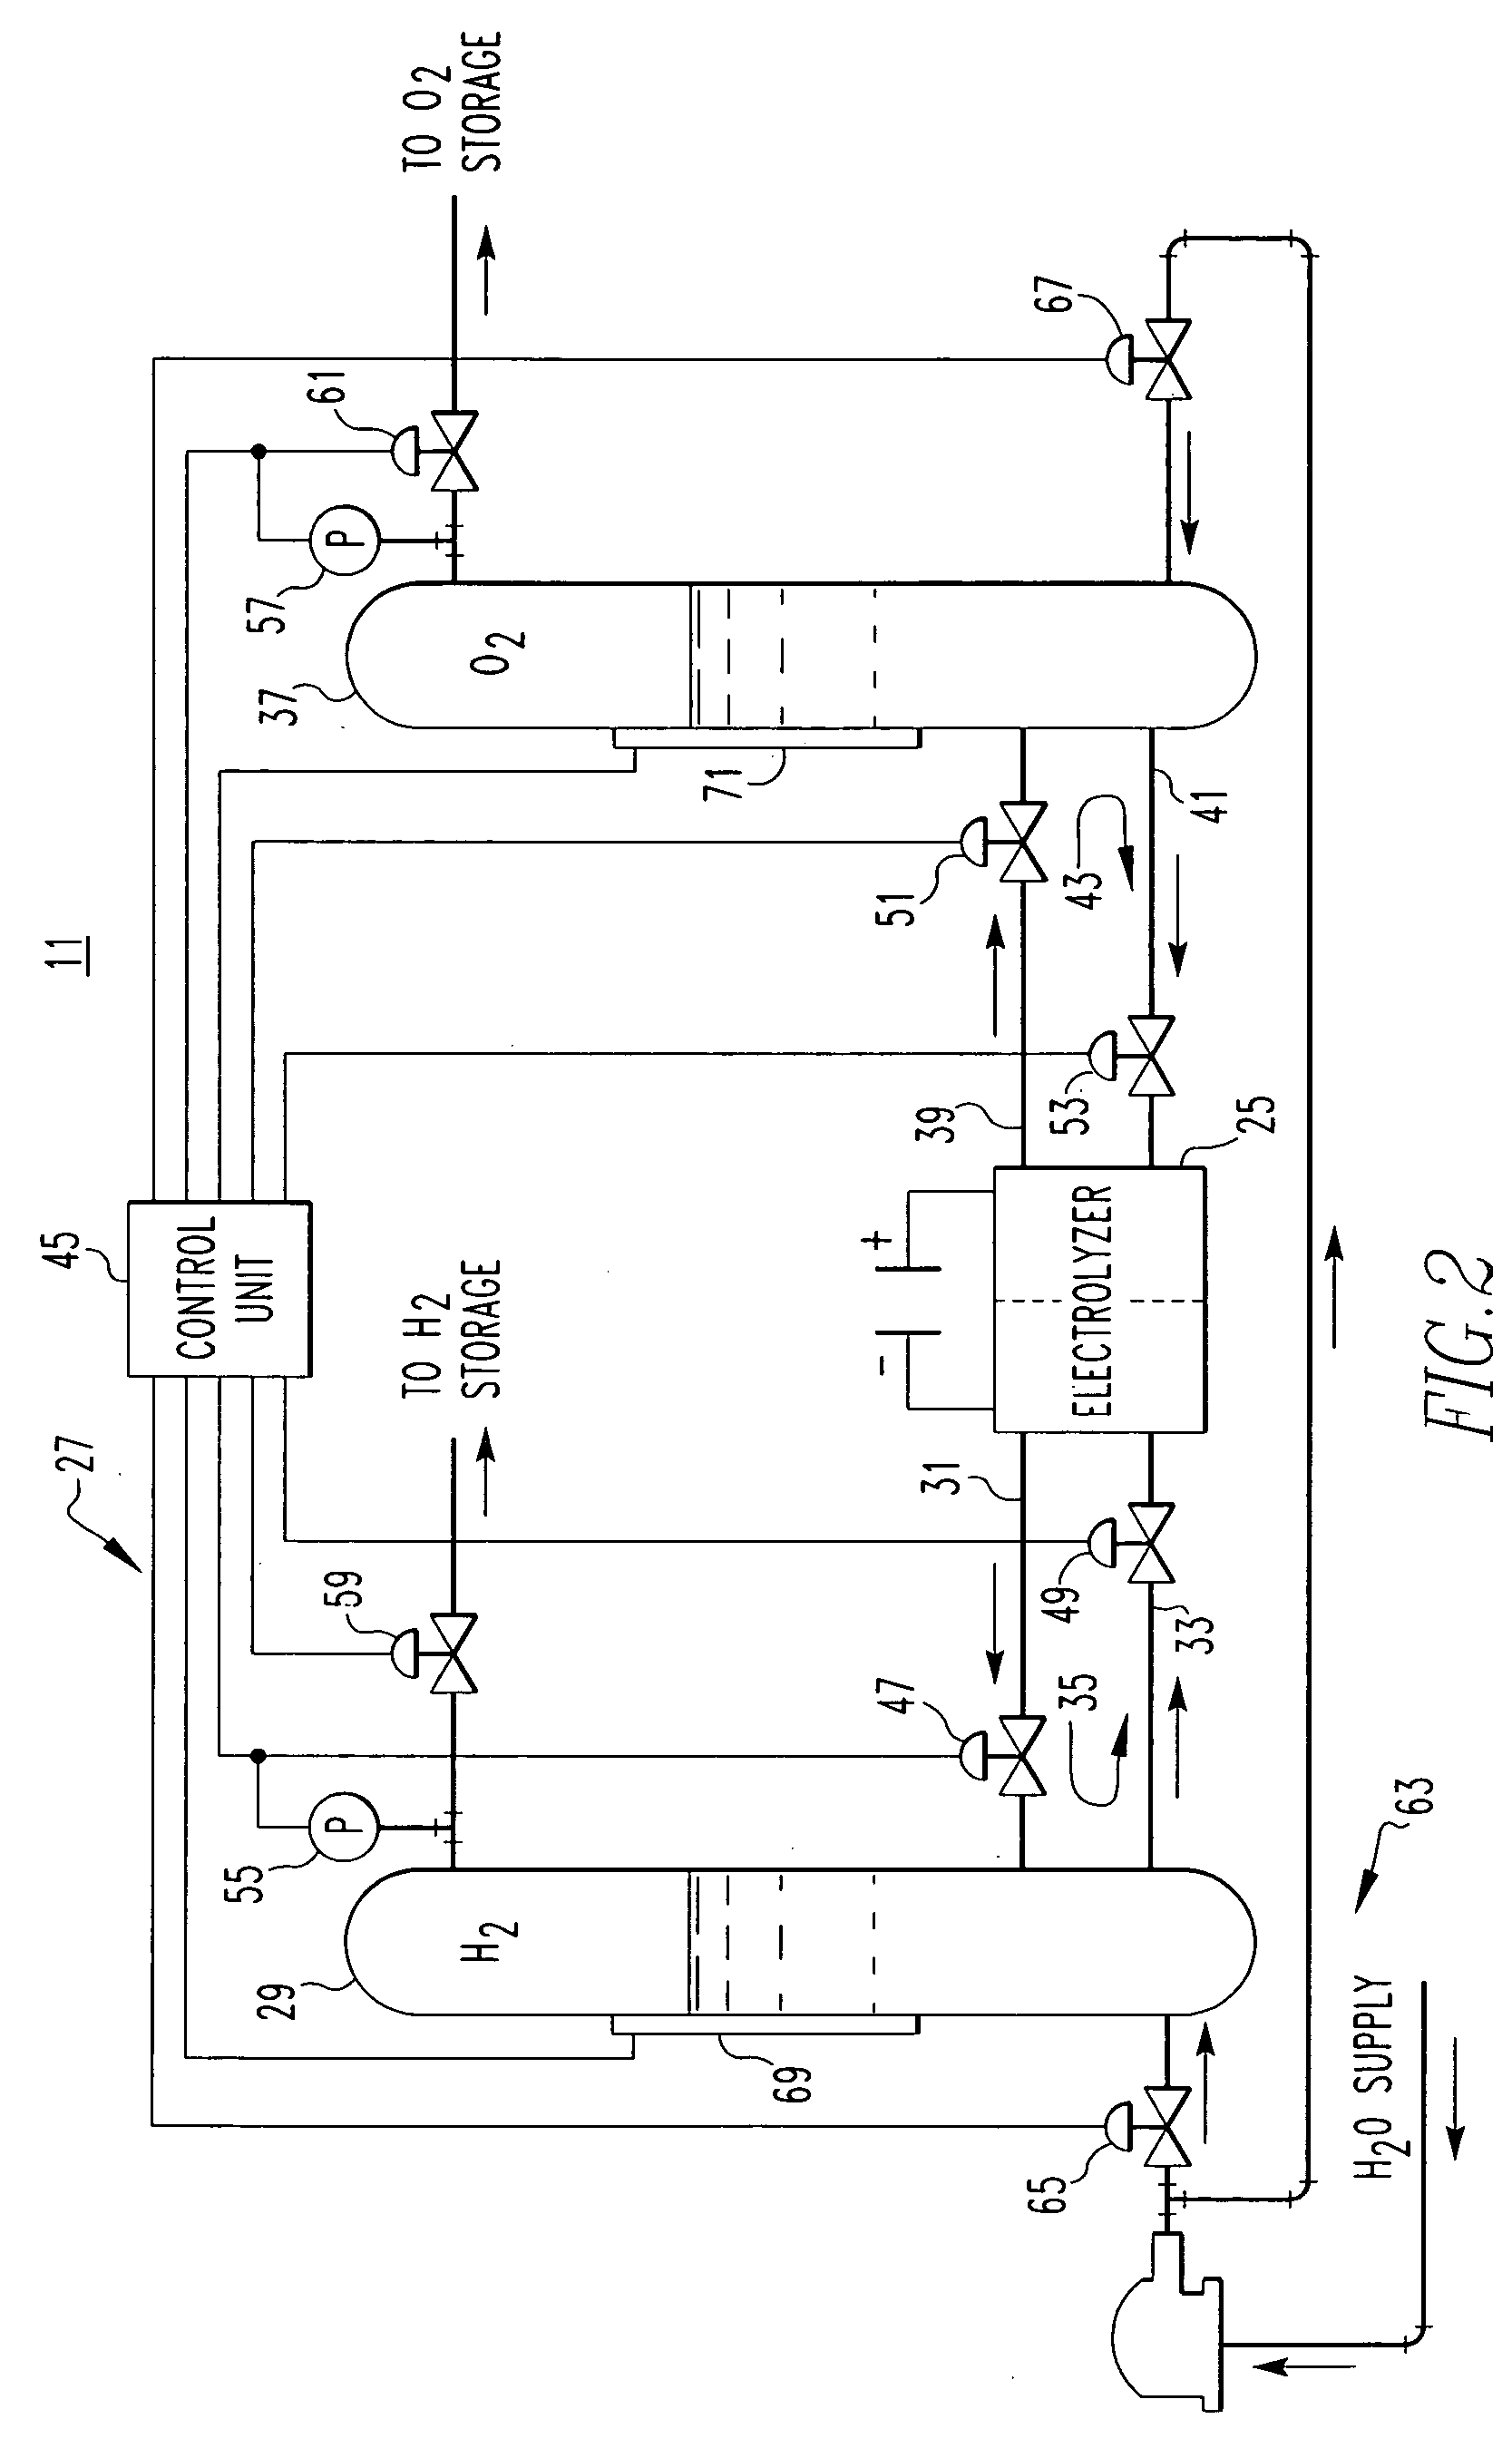 Hydrogen based energy storage apparatus and method